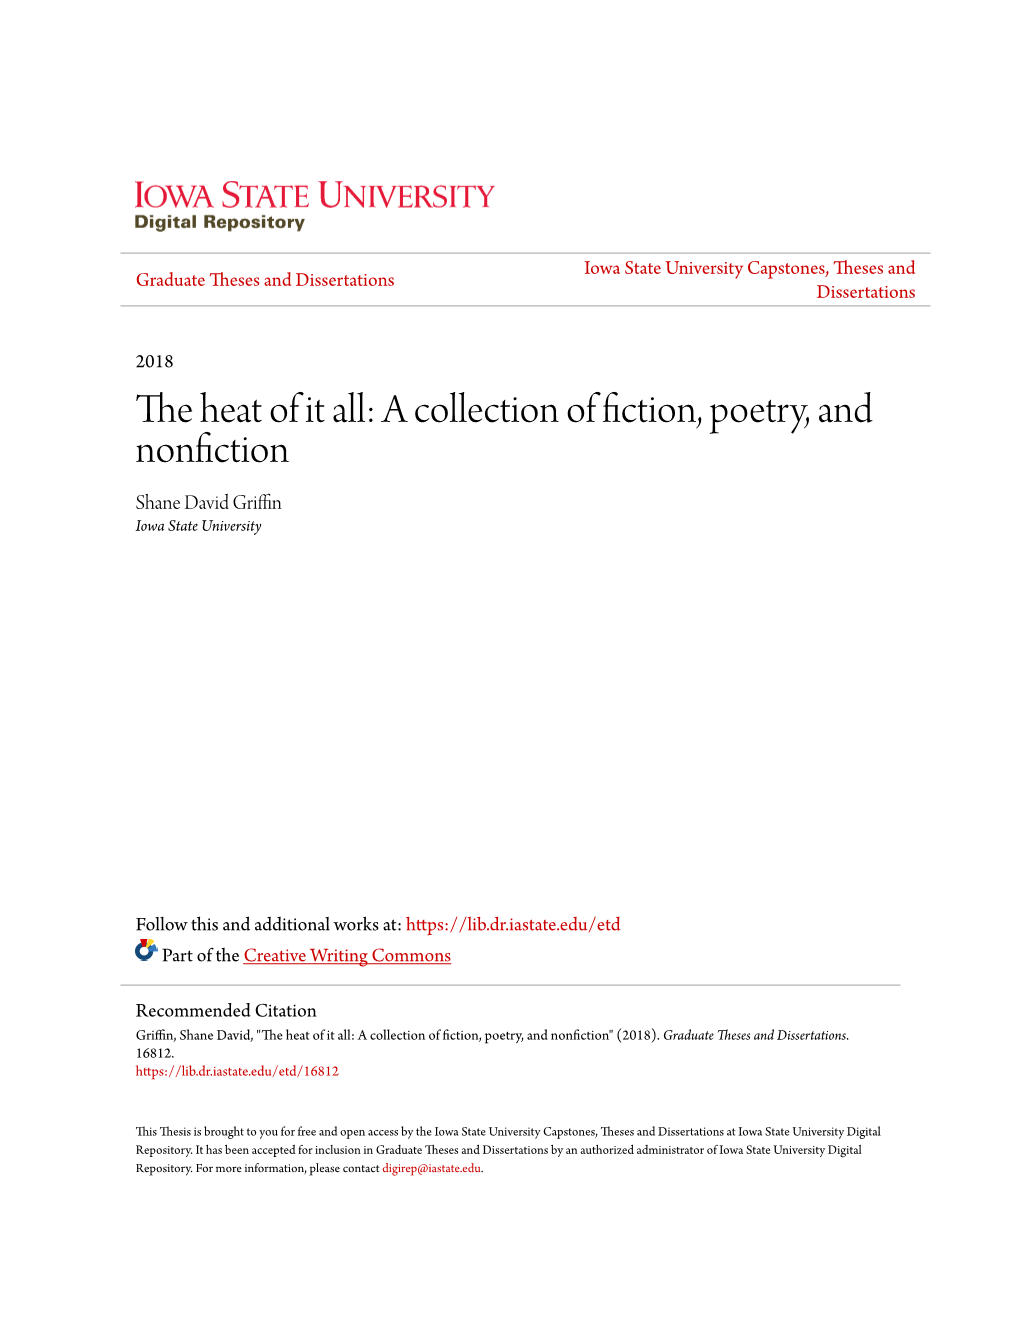 The Heat of It All: a Collection of Fiction, Poetry, and Nonfiction Shane David Griffin Iowa State University